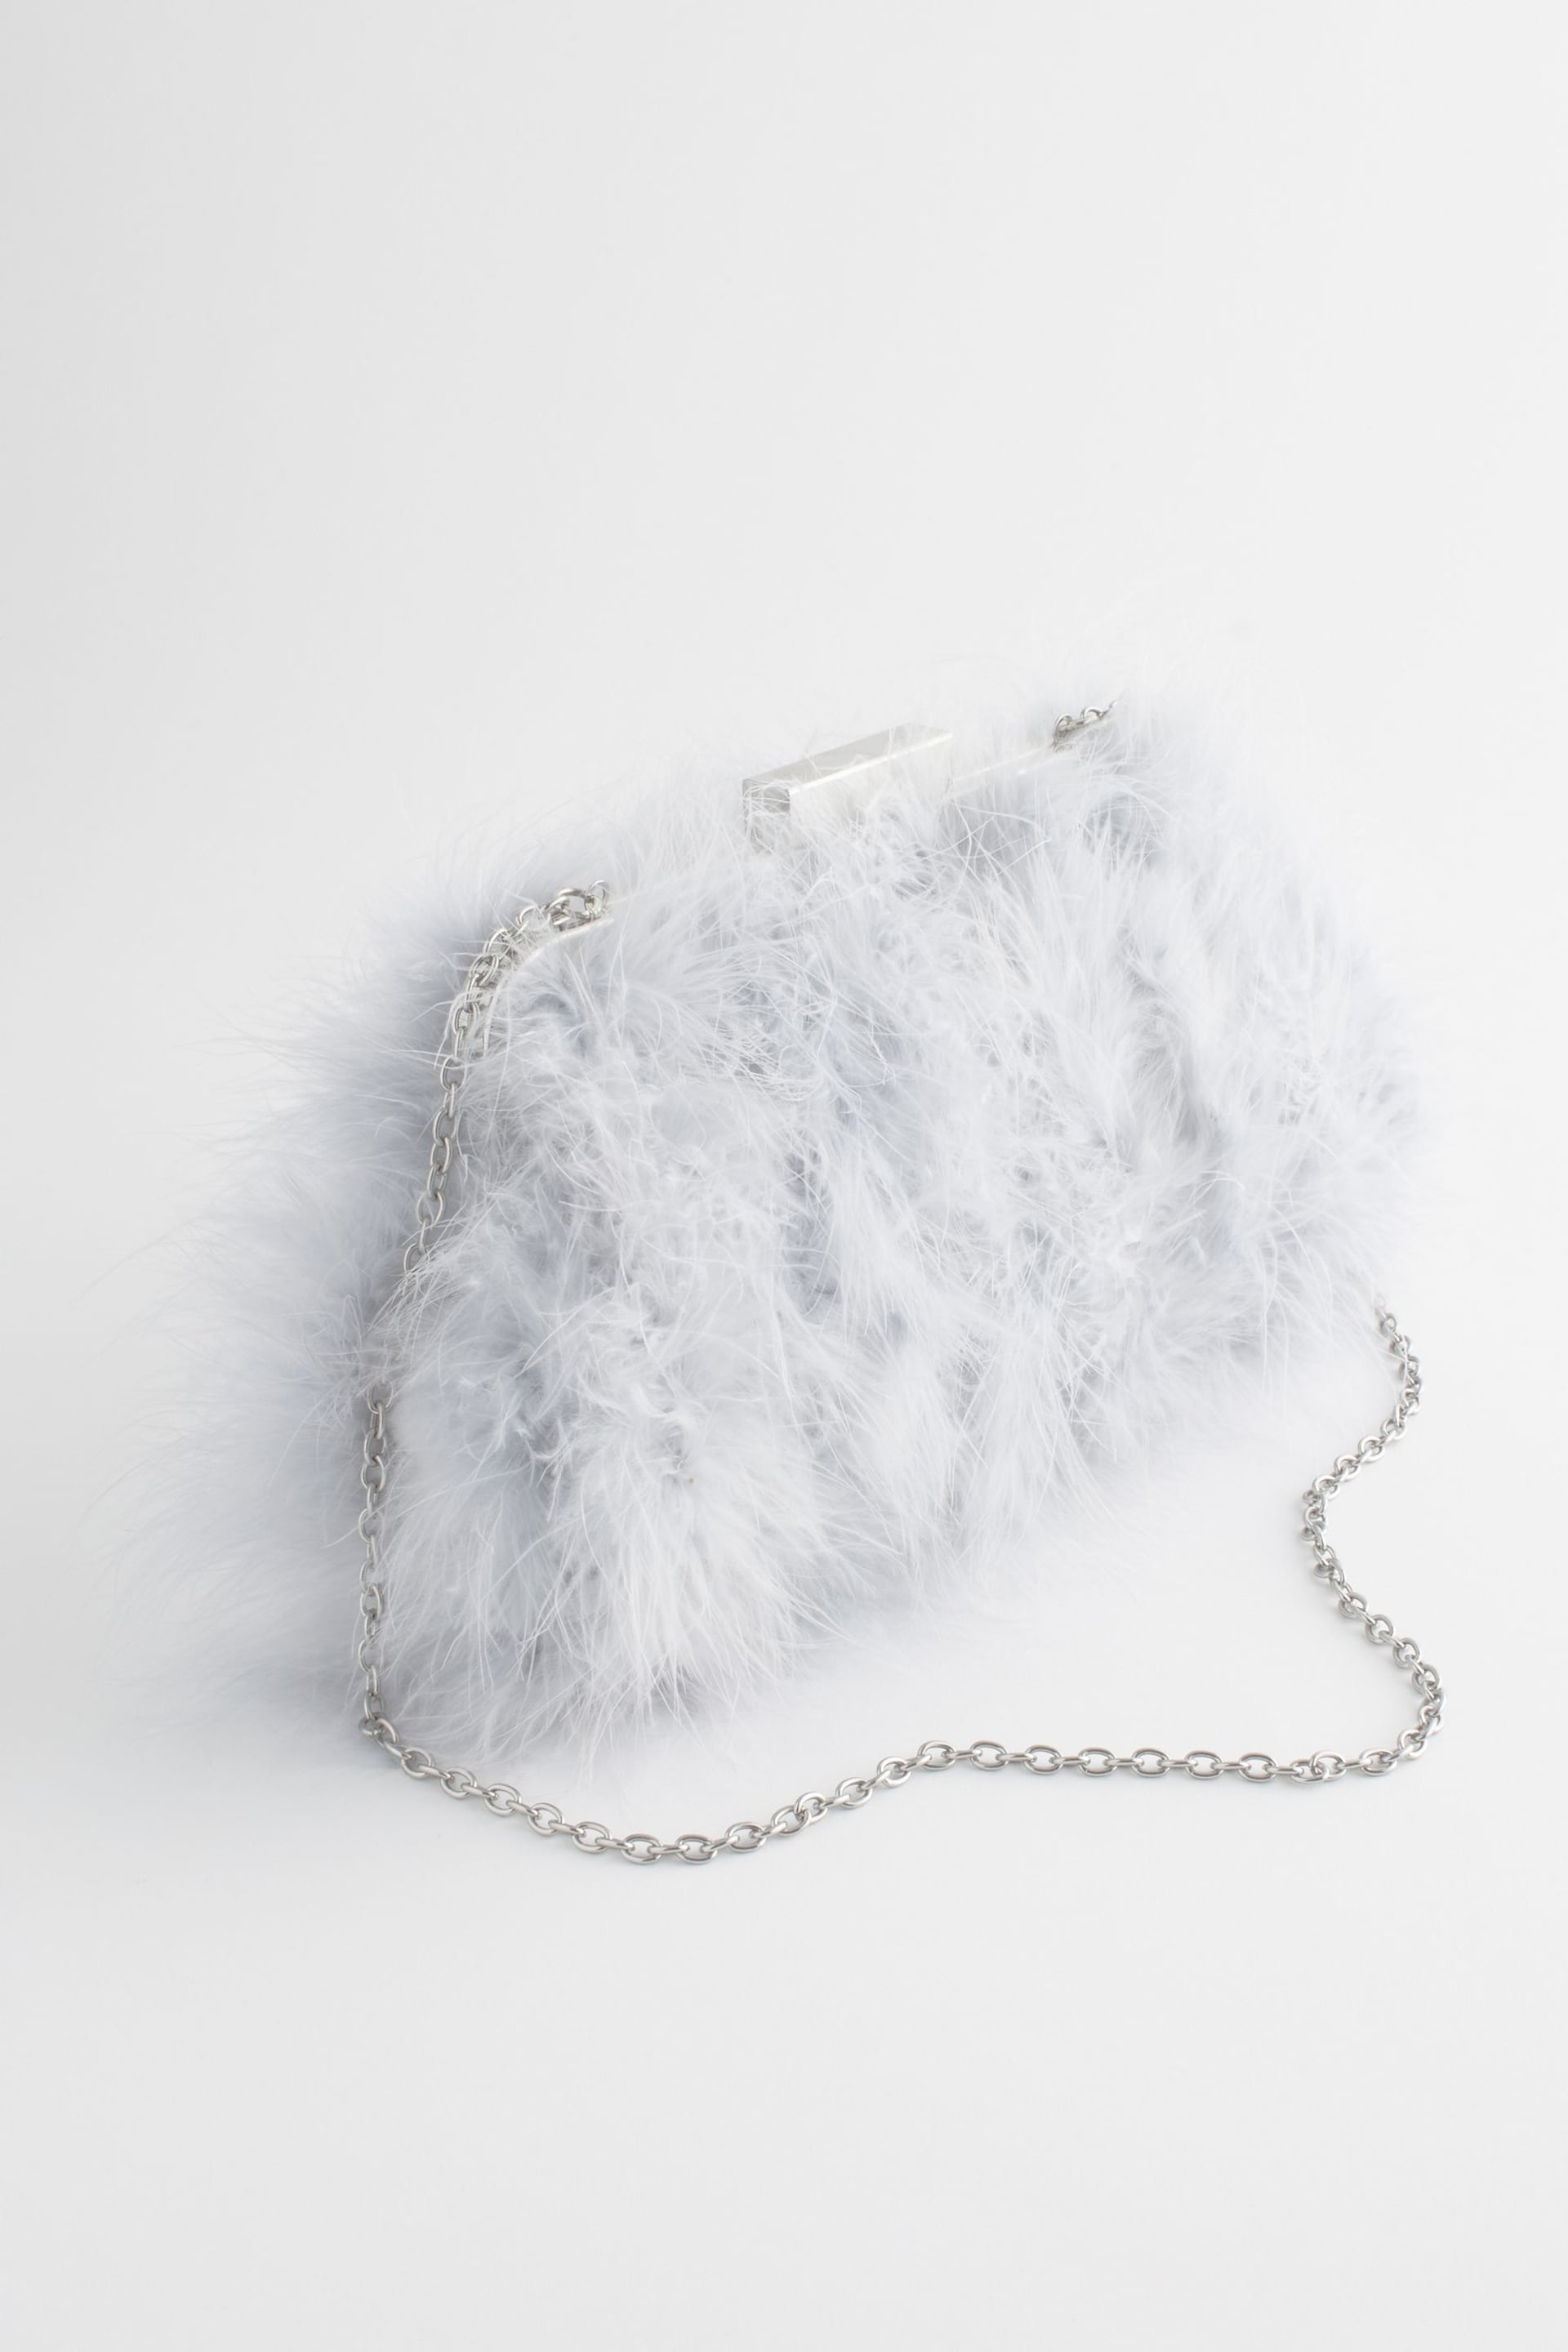 Grey Feather Clutch Bag - Image 4 of 9